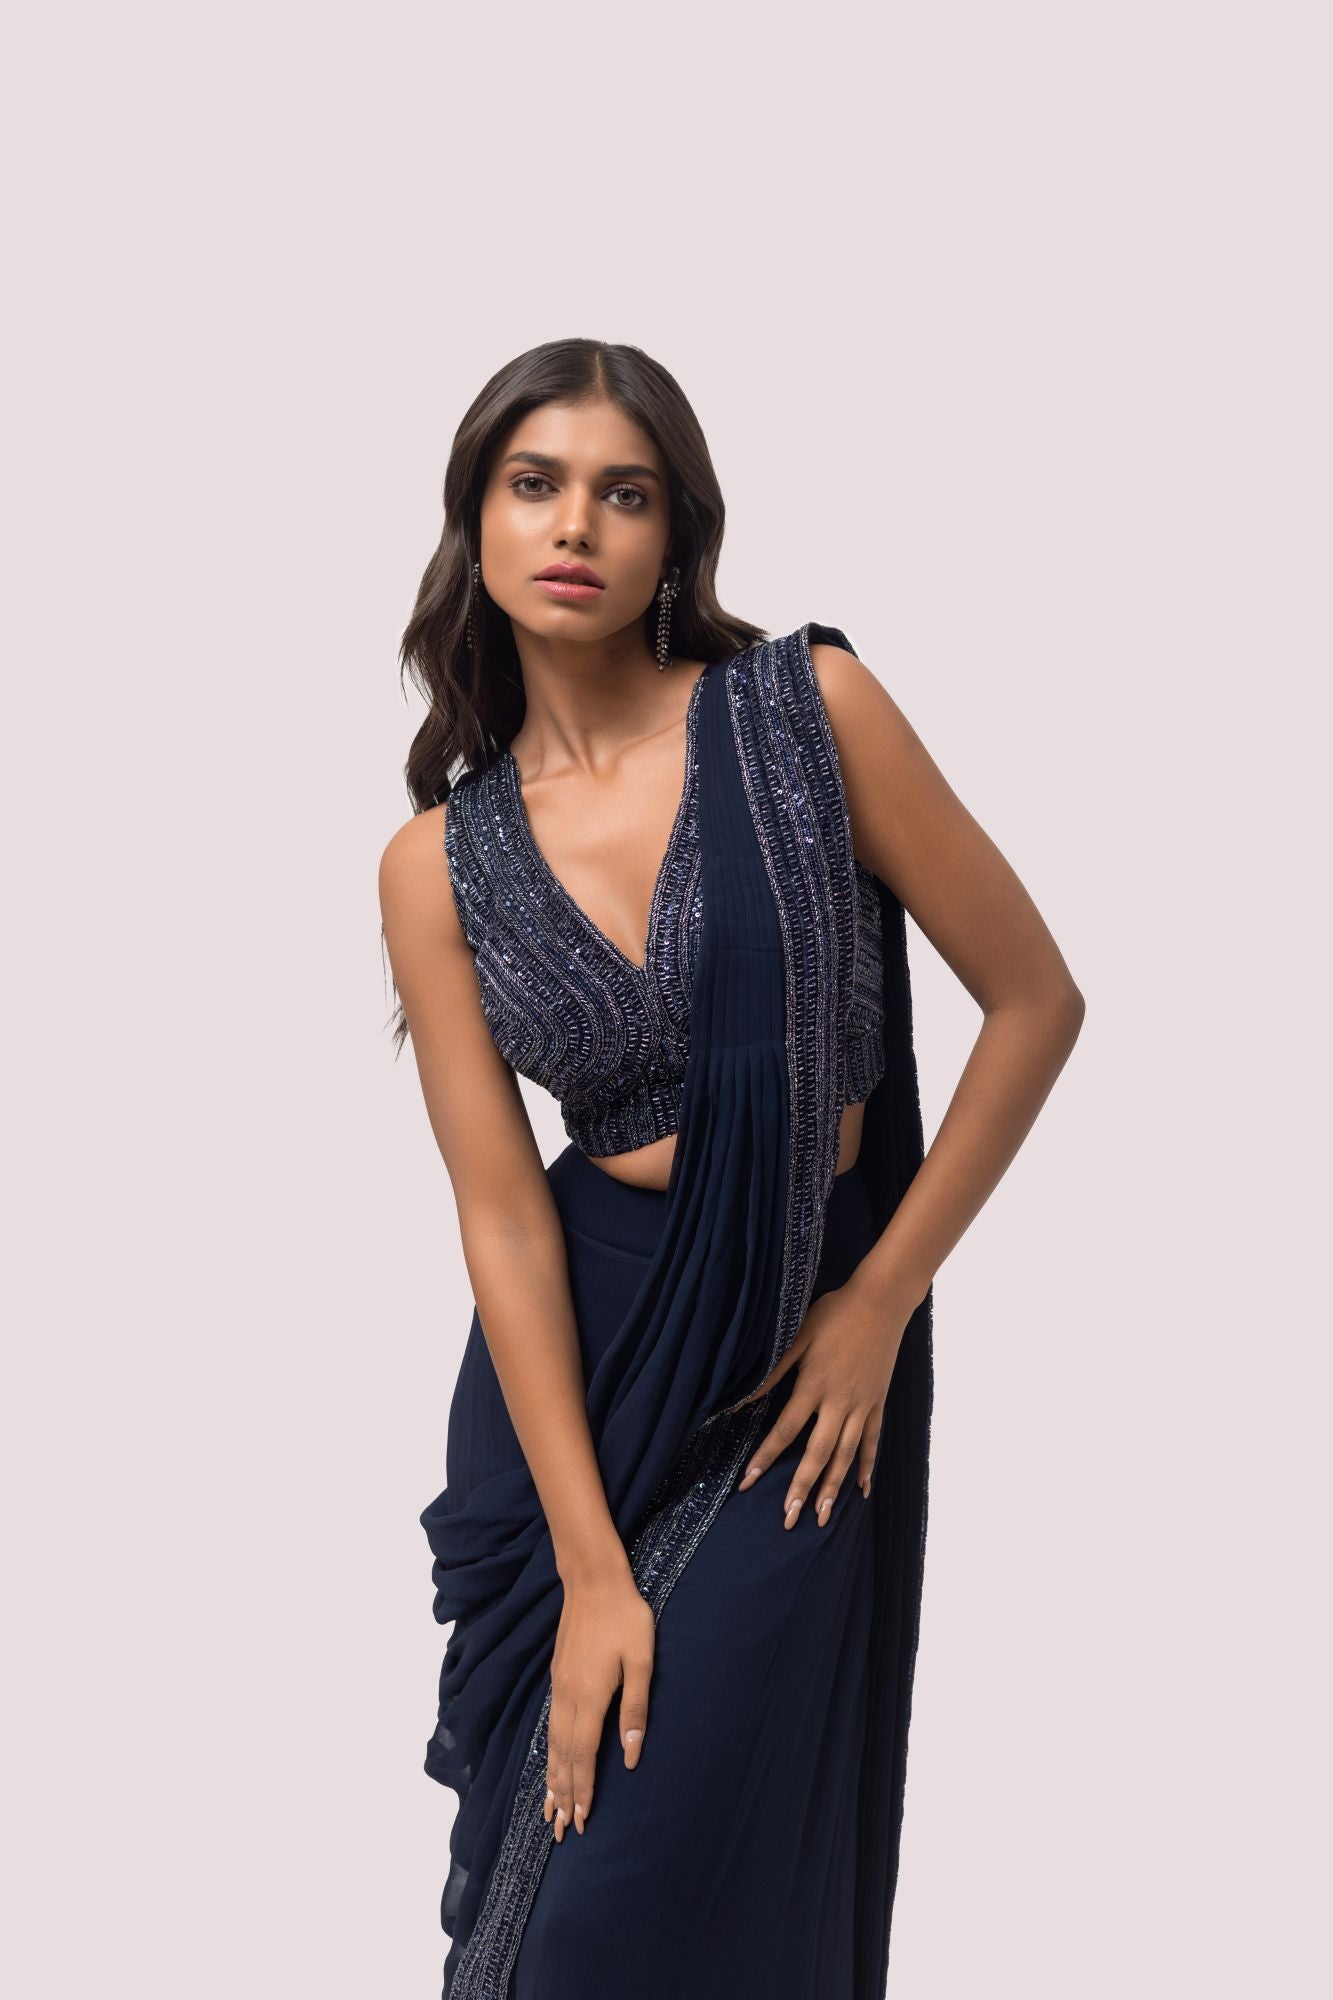 Shop the navy blue ruffle saree with sleeveless blouse. Make a fashion statement on festive occasions and weddings with designer sarees, designer suits, Indian dresses, Anarkali suits, palazzo suits, designer gowns, sharara suits, and embroidered sarees from Pure Elegance Indian fashion store in the USA.